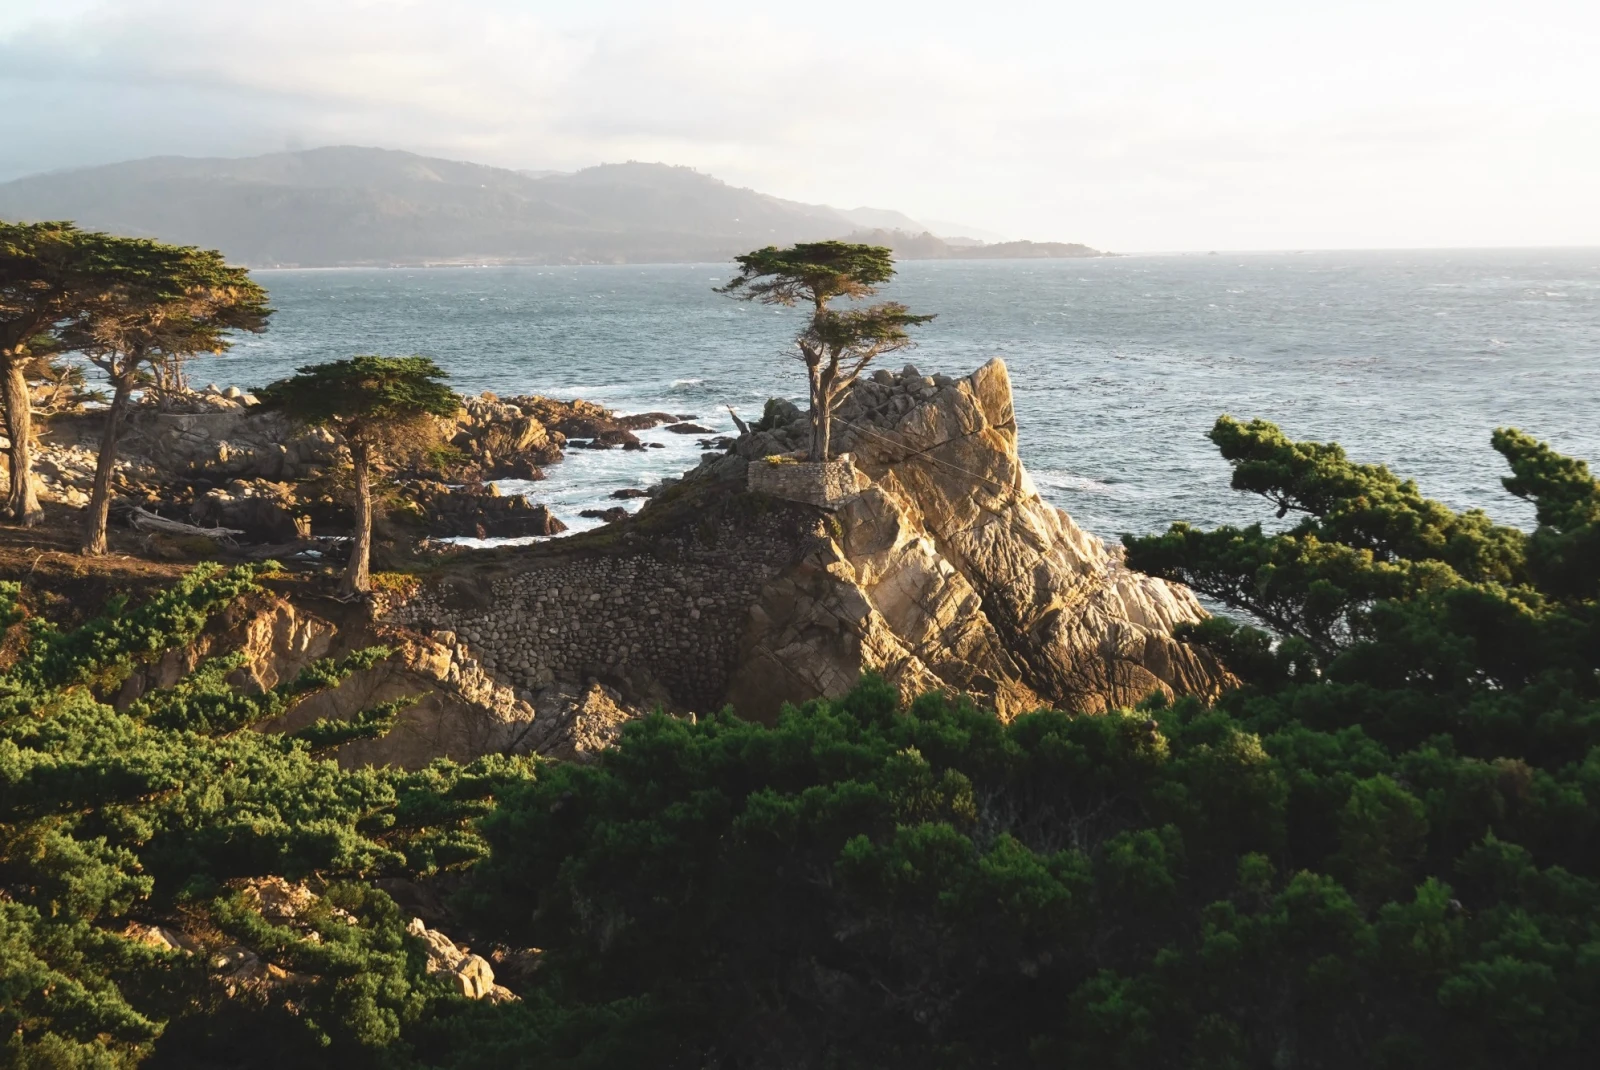 tree atop a rocky formation overlooking the sea